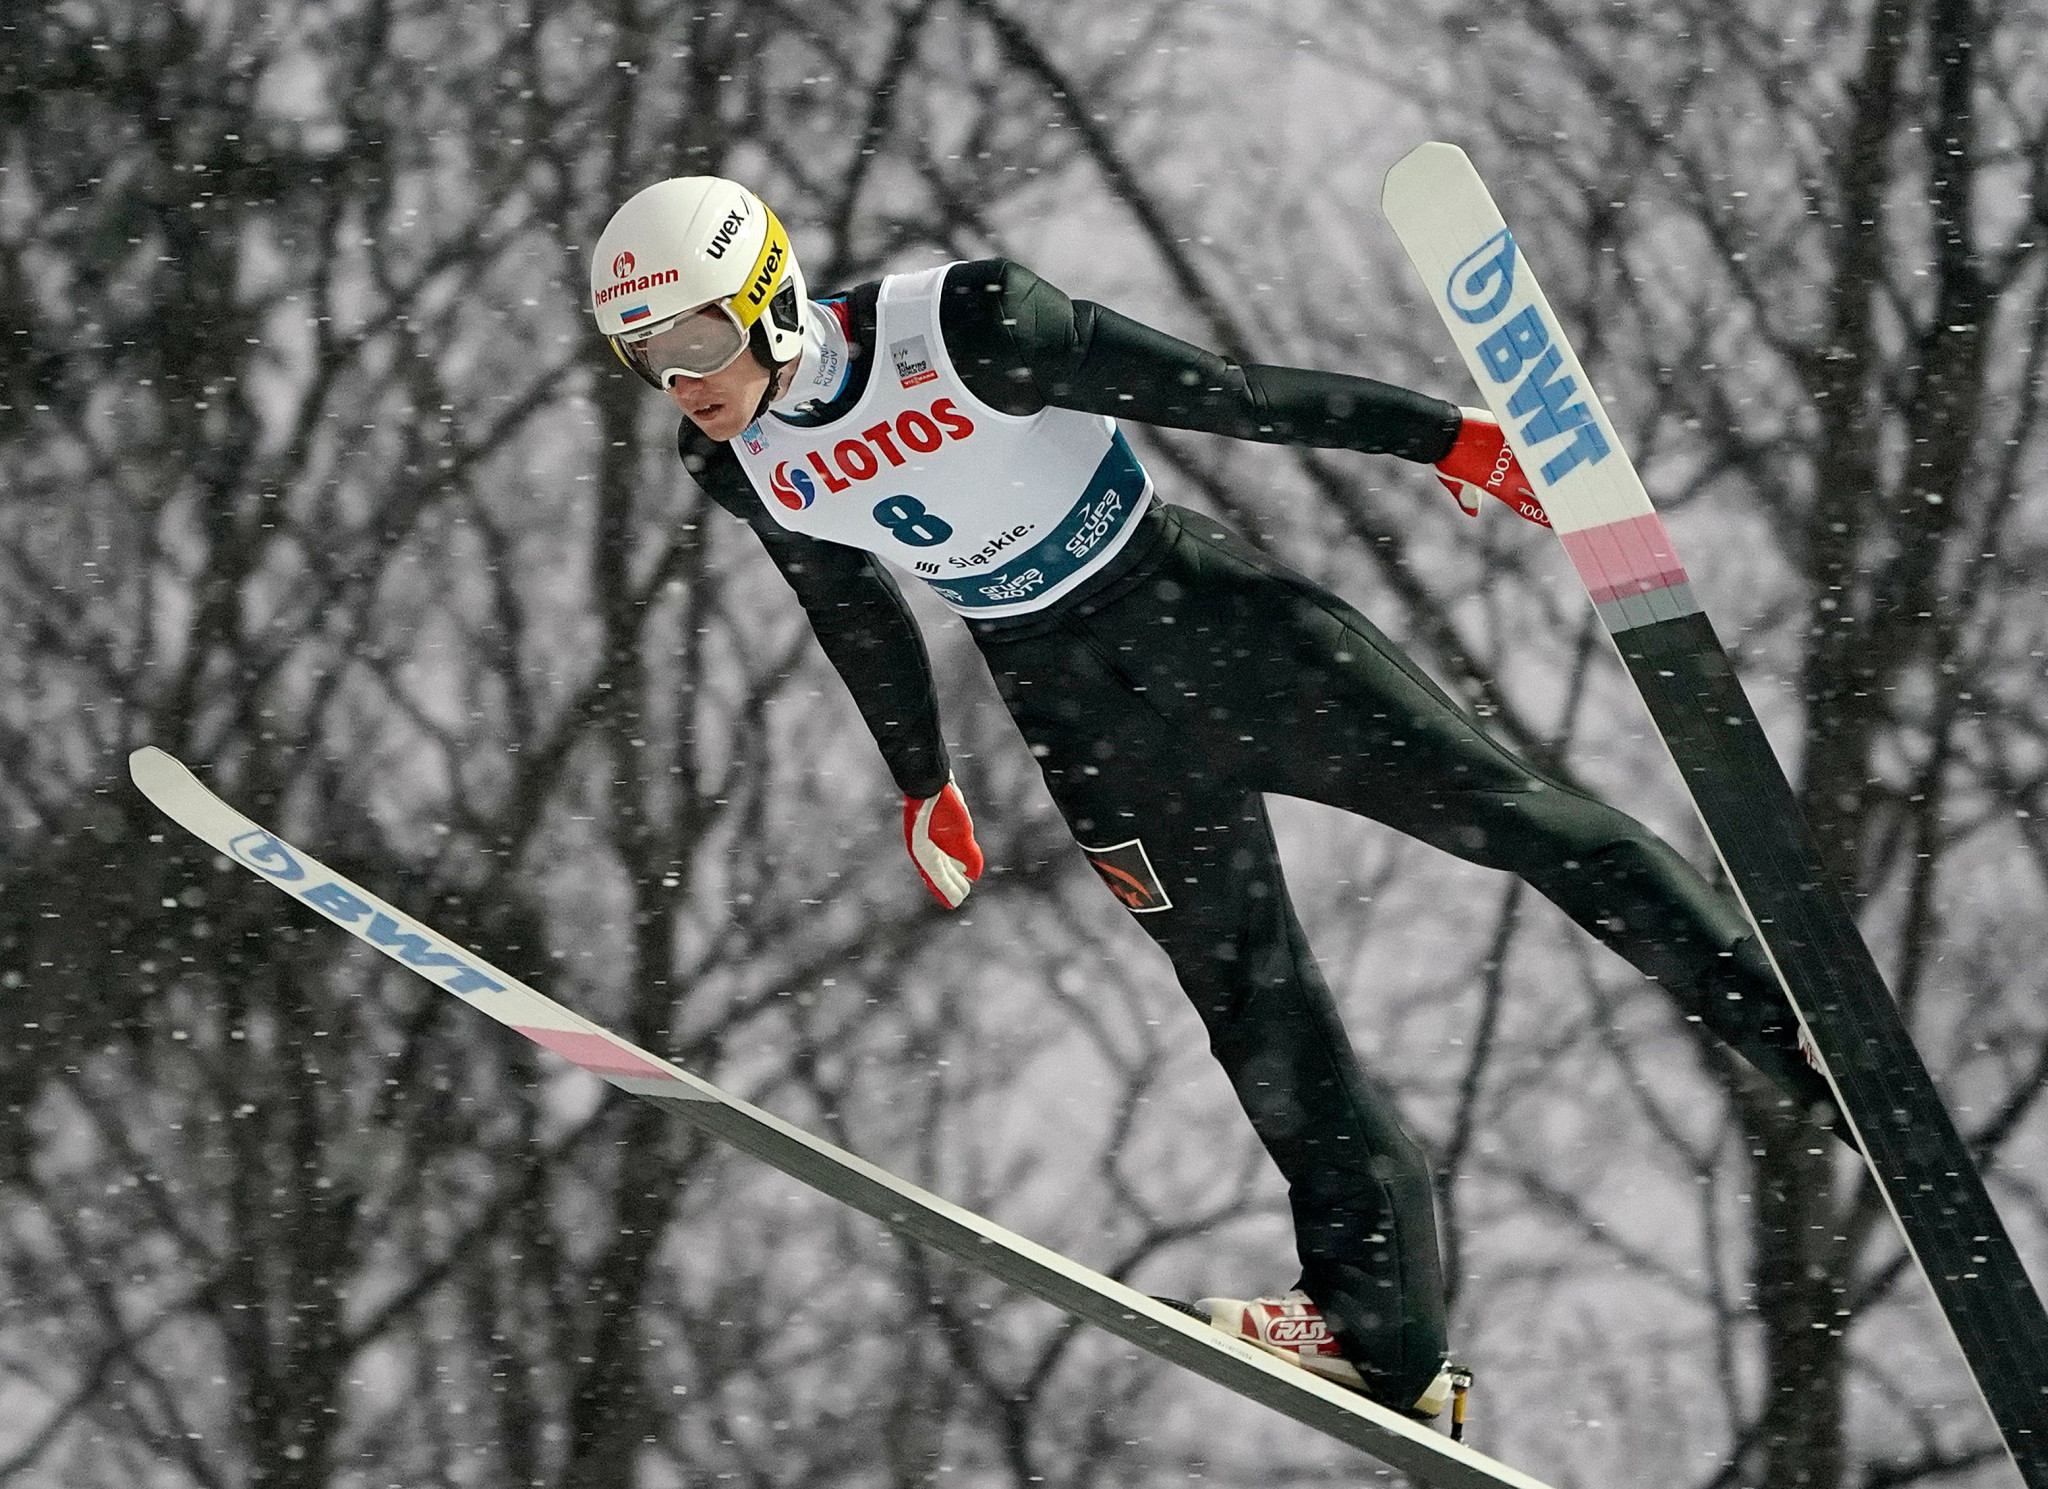 World Cup leader Ryōyū Kobayashi will lead Japan's ski jumping challenge ©Getty Images